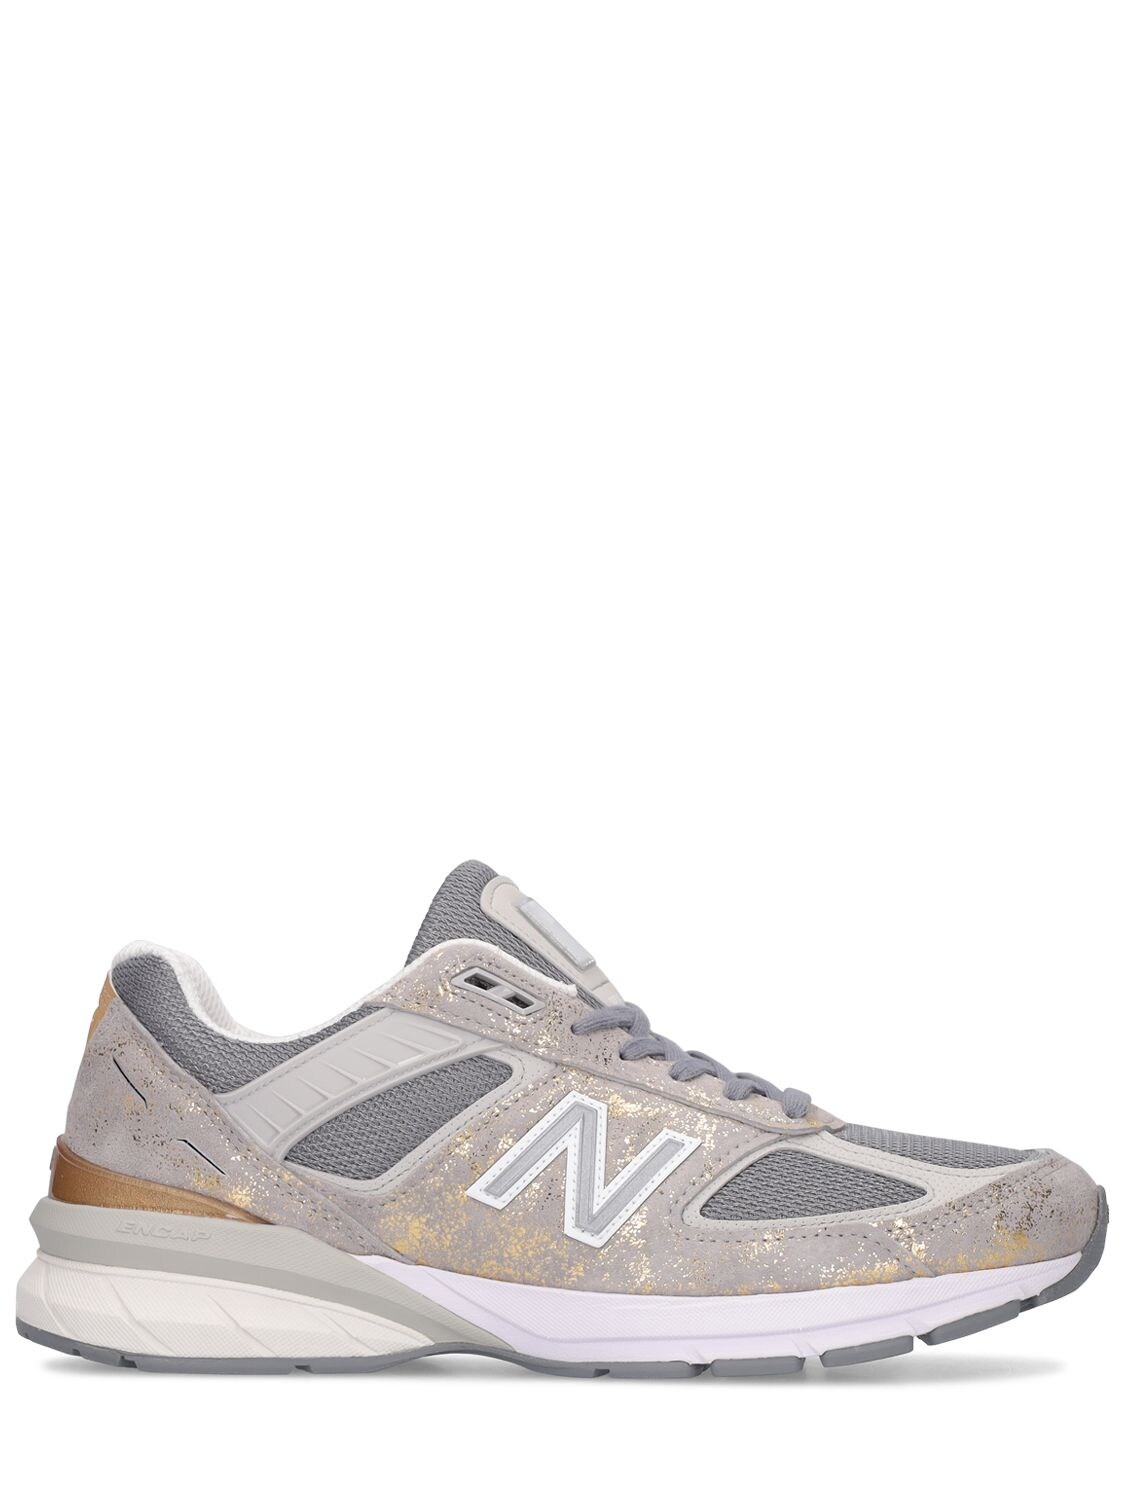 New Balance 990 Sneakers In Grey,gold